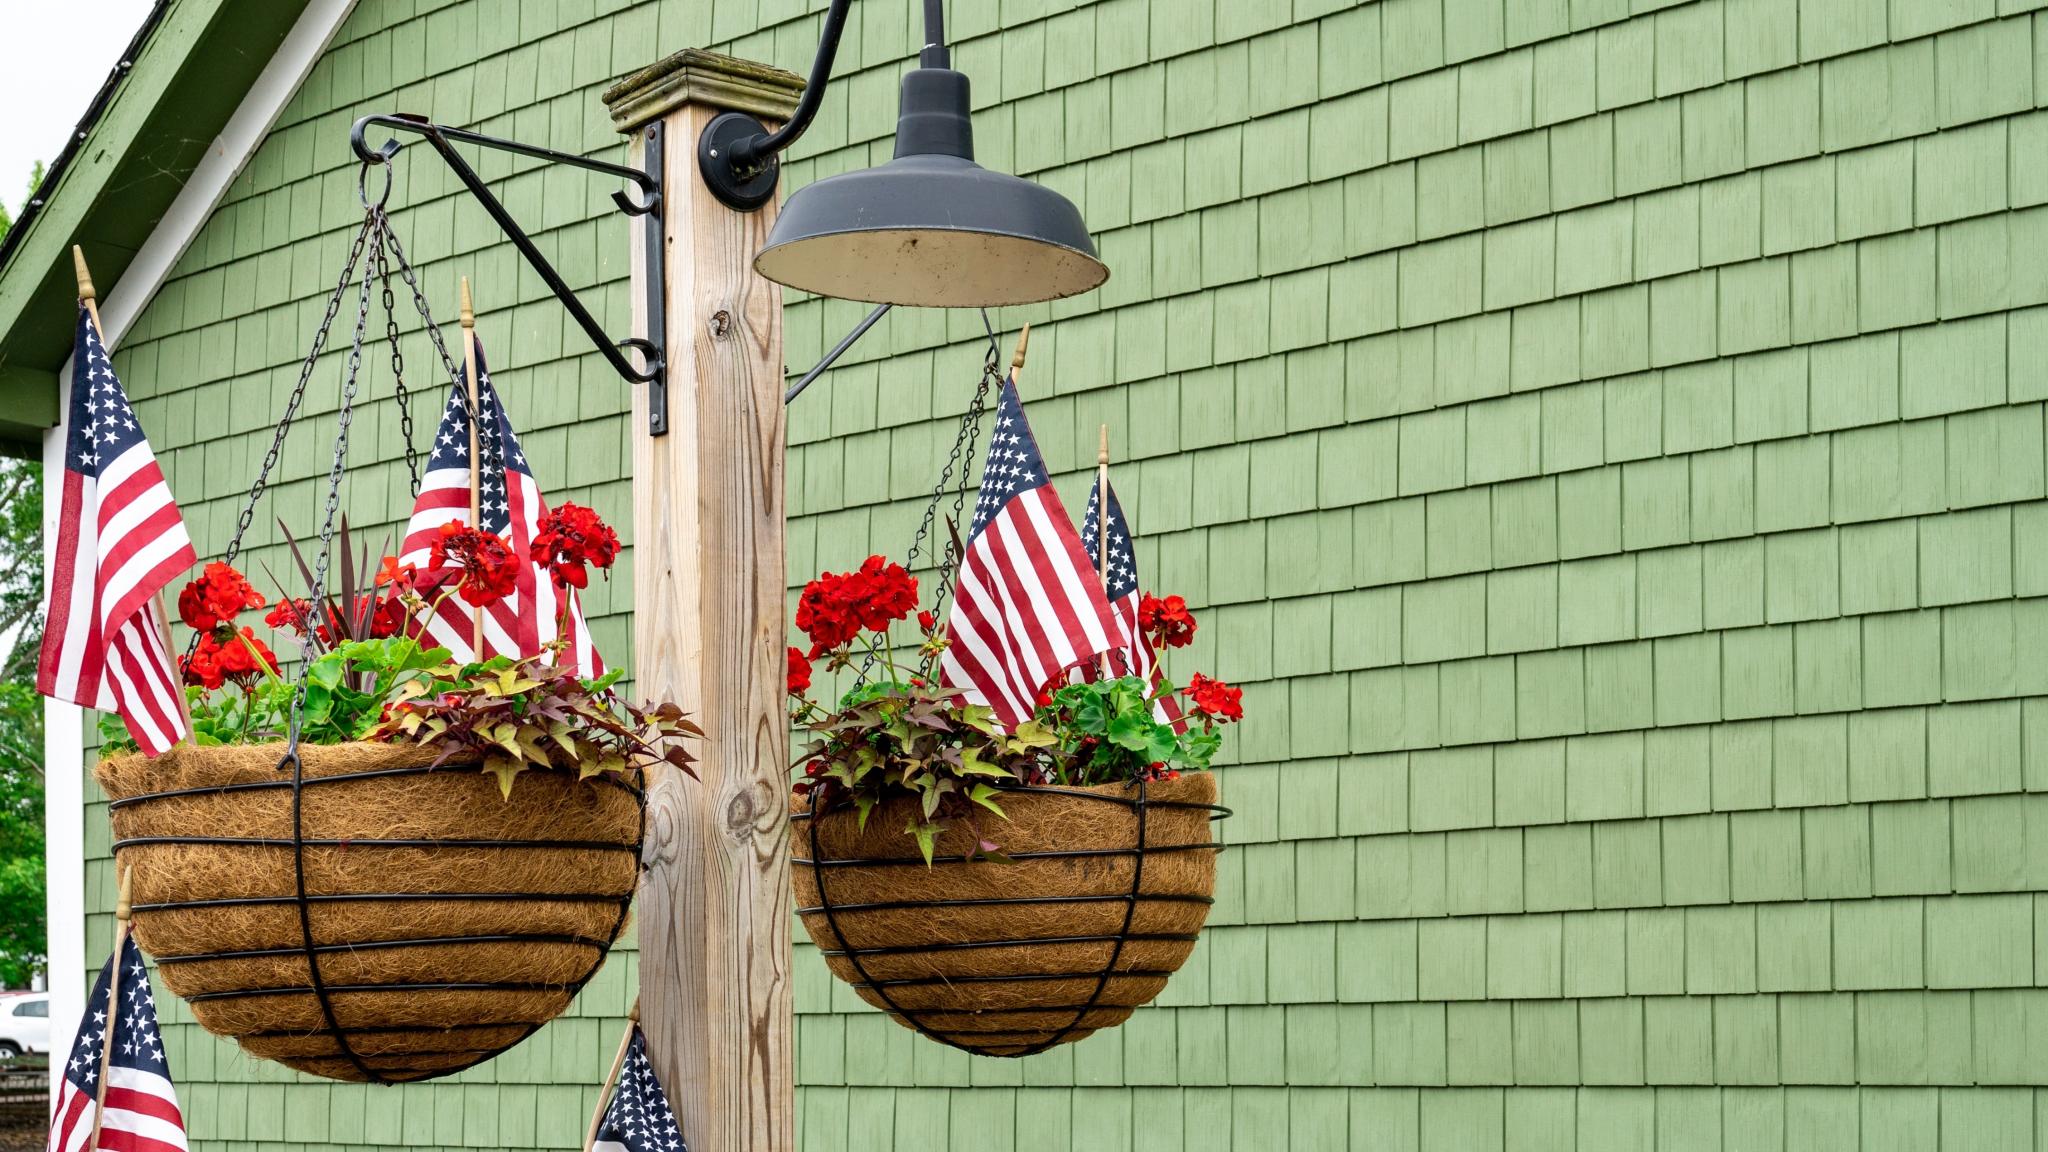 Hanging baskets with coco coir liners